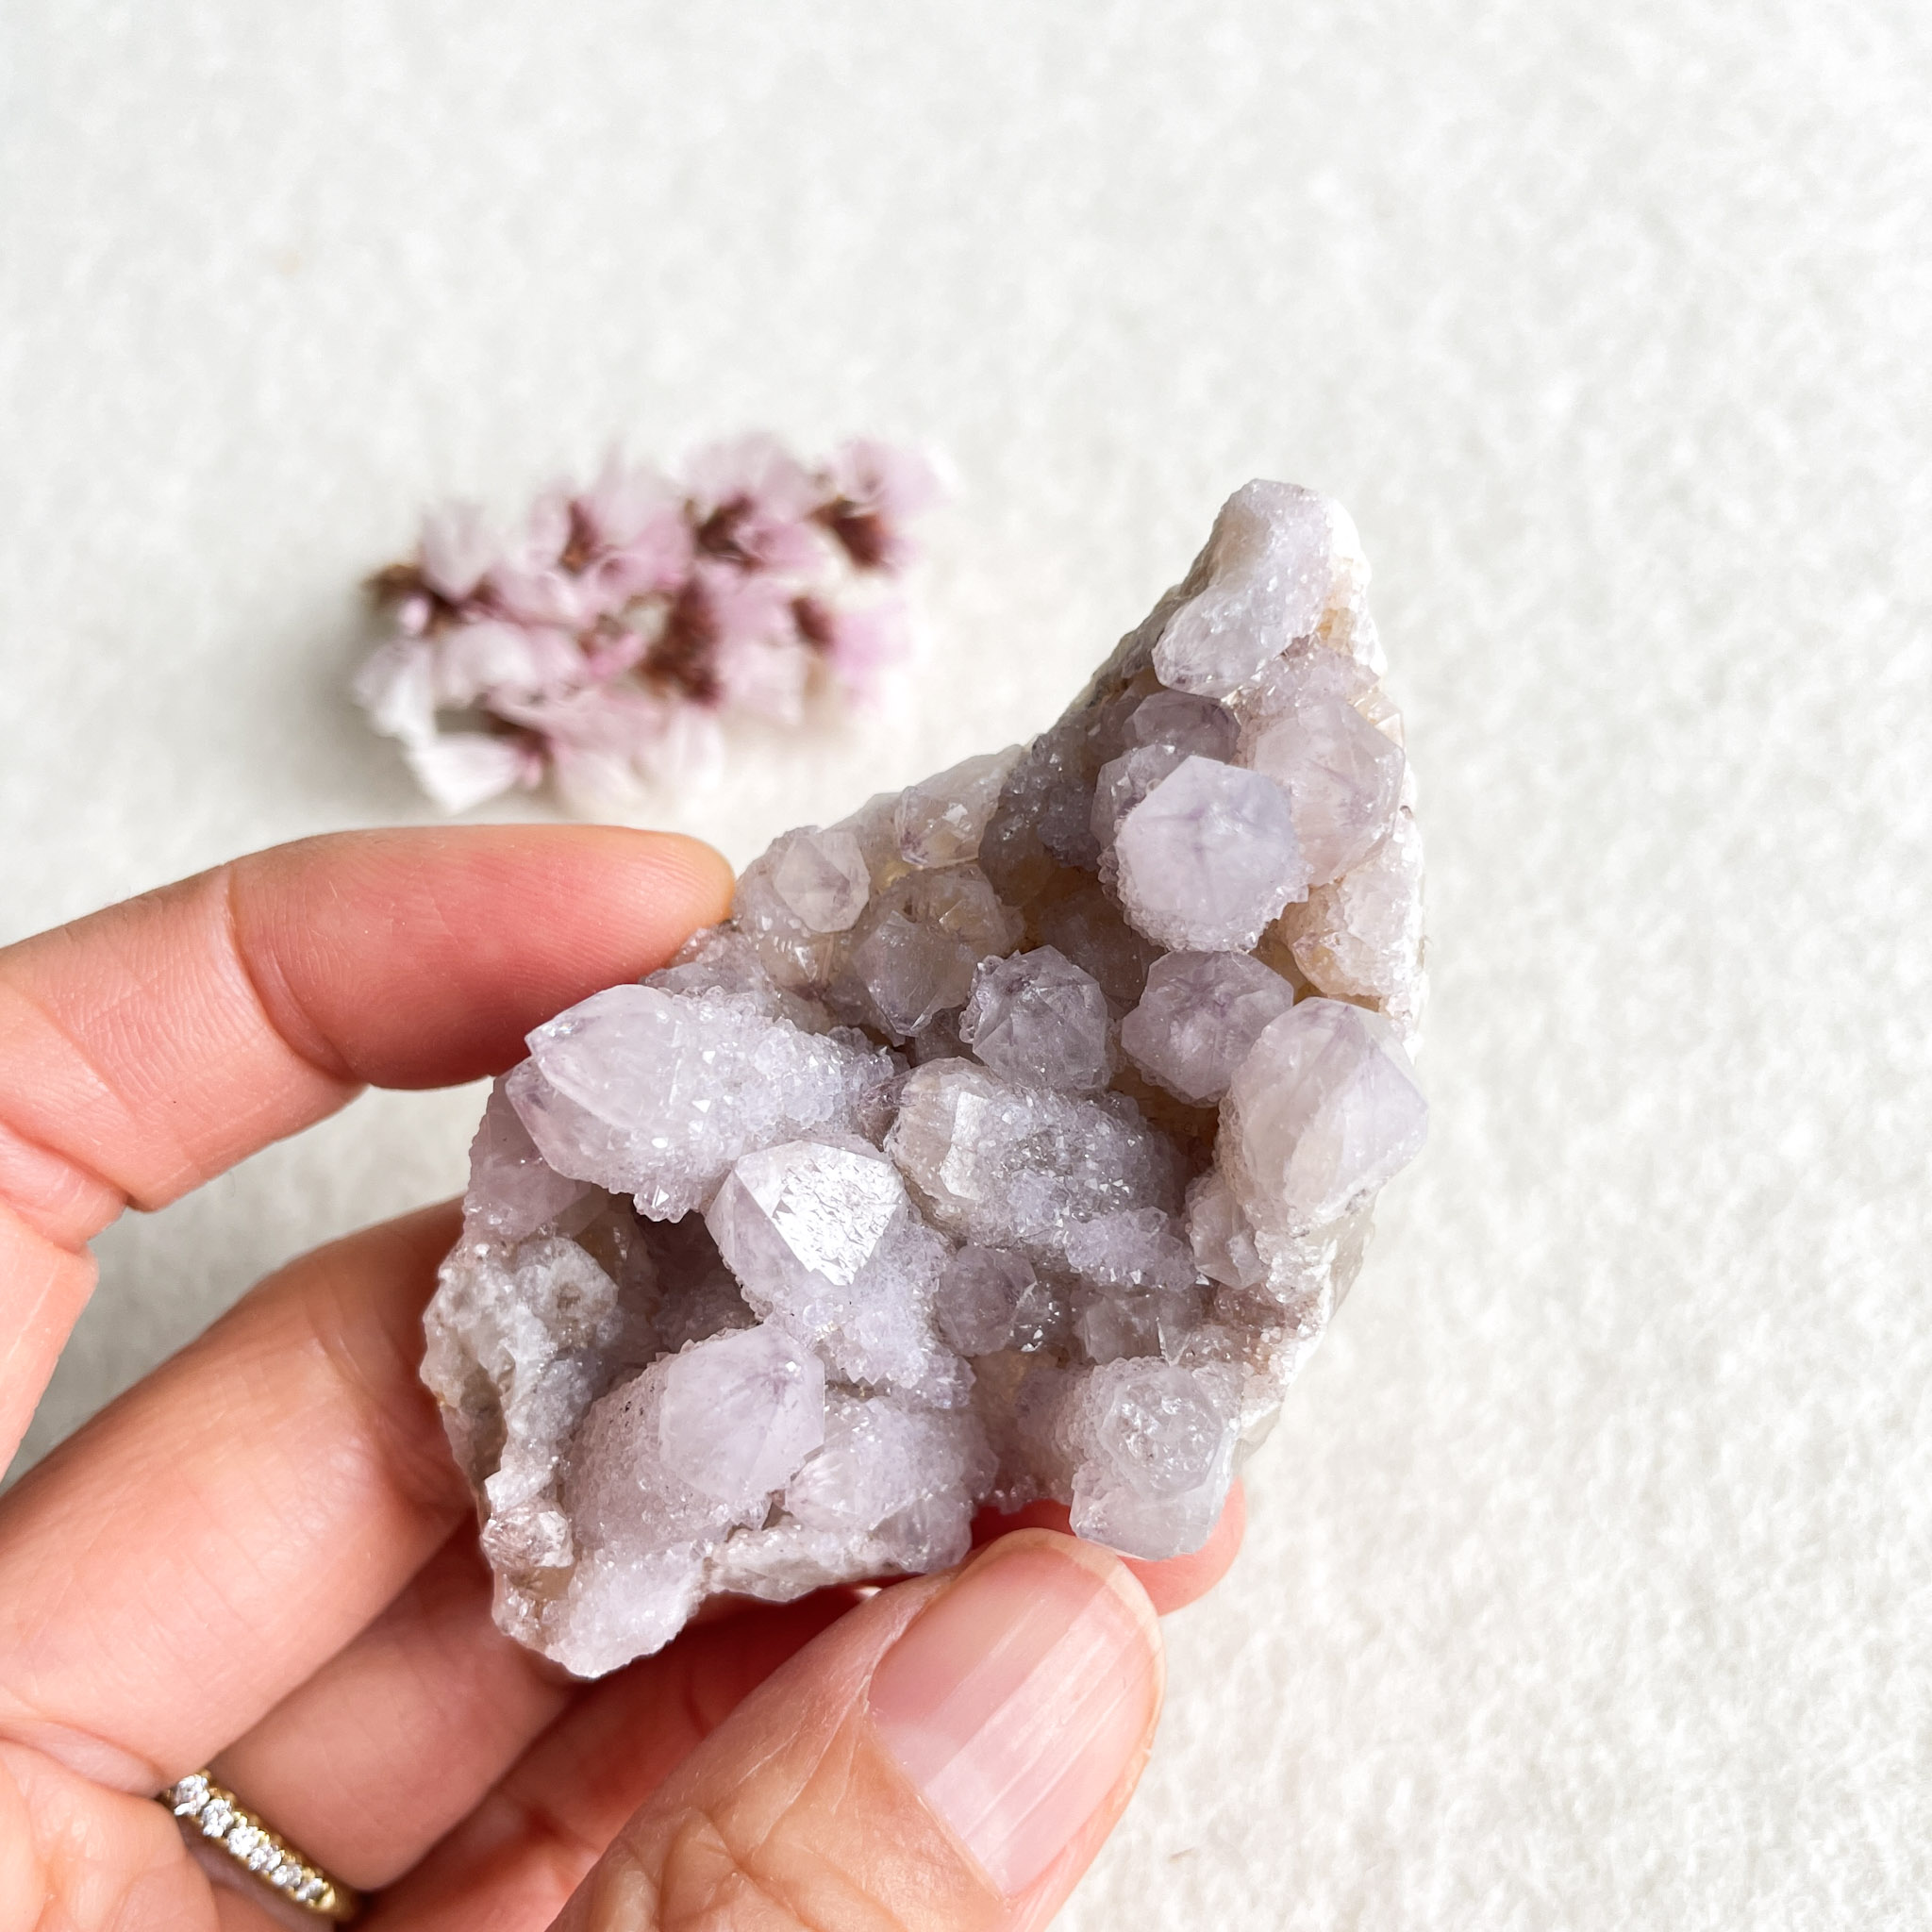 A close-up photo of a hand holding a piece of amethyst geode, with a blurry cluster of small pink flowers in the background on a textured white surface.